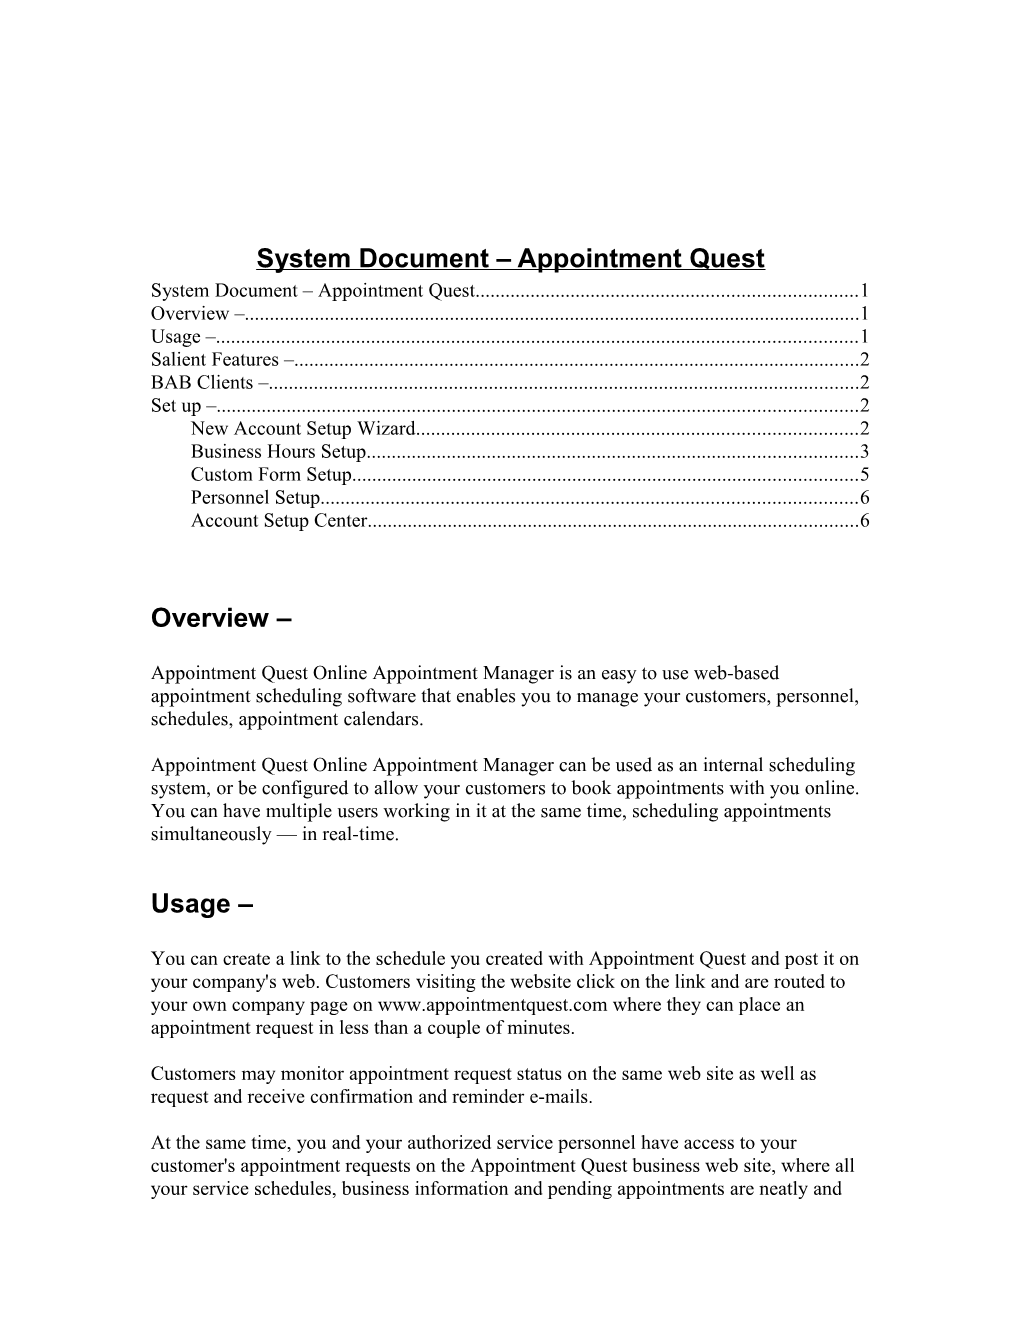 System Document Appointment Quest